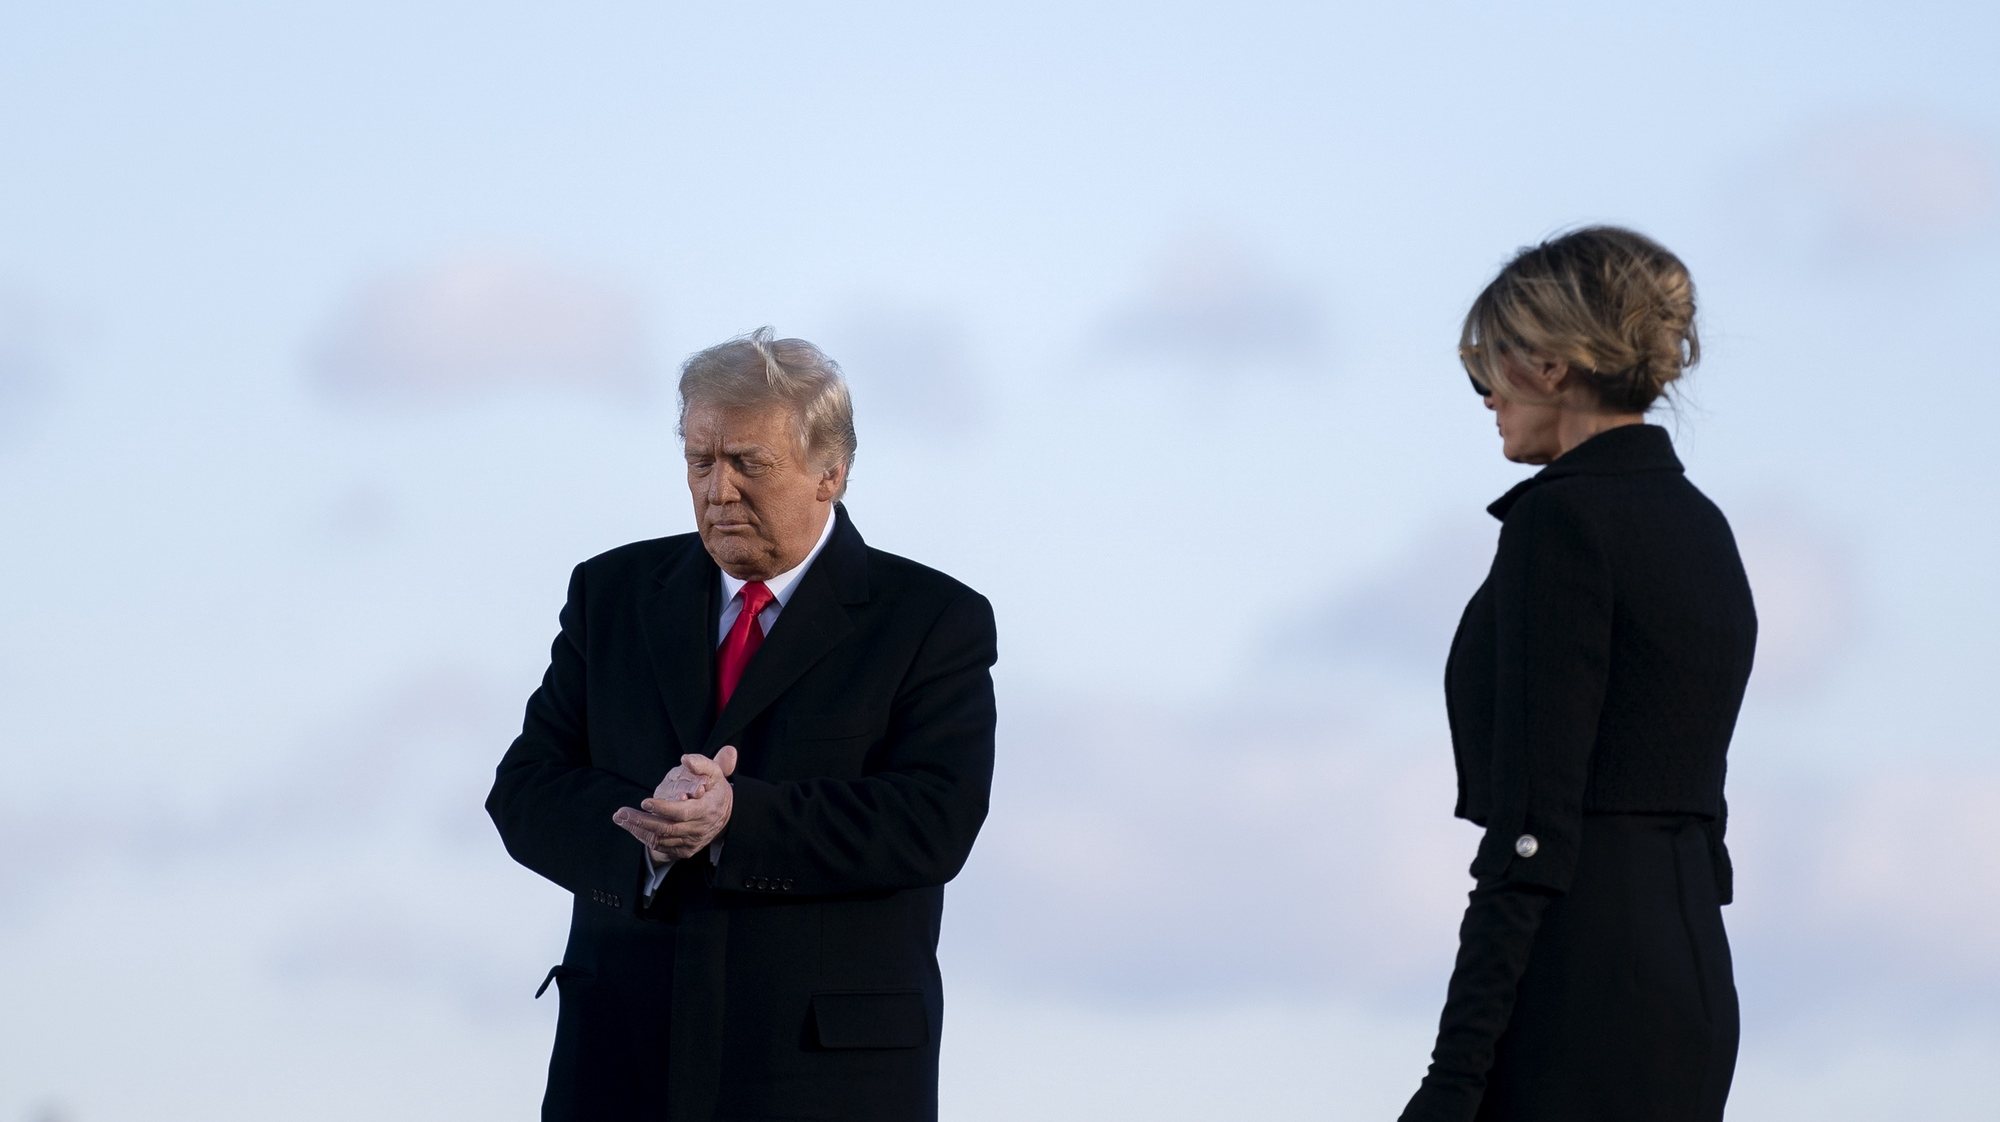 epa08953514 U.S. President Donald Trump, left, and U.S. First Lady Melania Trump prepare to depart a farewell ceremony at Joint Base Andrews, Maryland, USA, 20 January 2021. US President Donald J. Trump is not attending the Inaugration ceremony of President-elect Joe Biden. Biden won the 03 November 2020 election to become the 46th President of the United States of America.  EPA/Stefani Reynolds / POOL